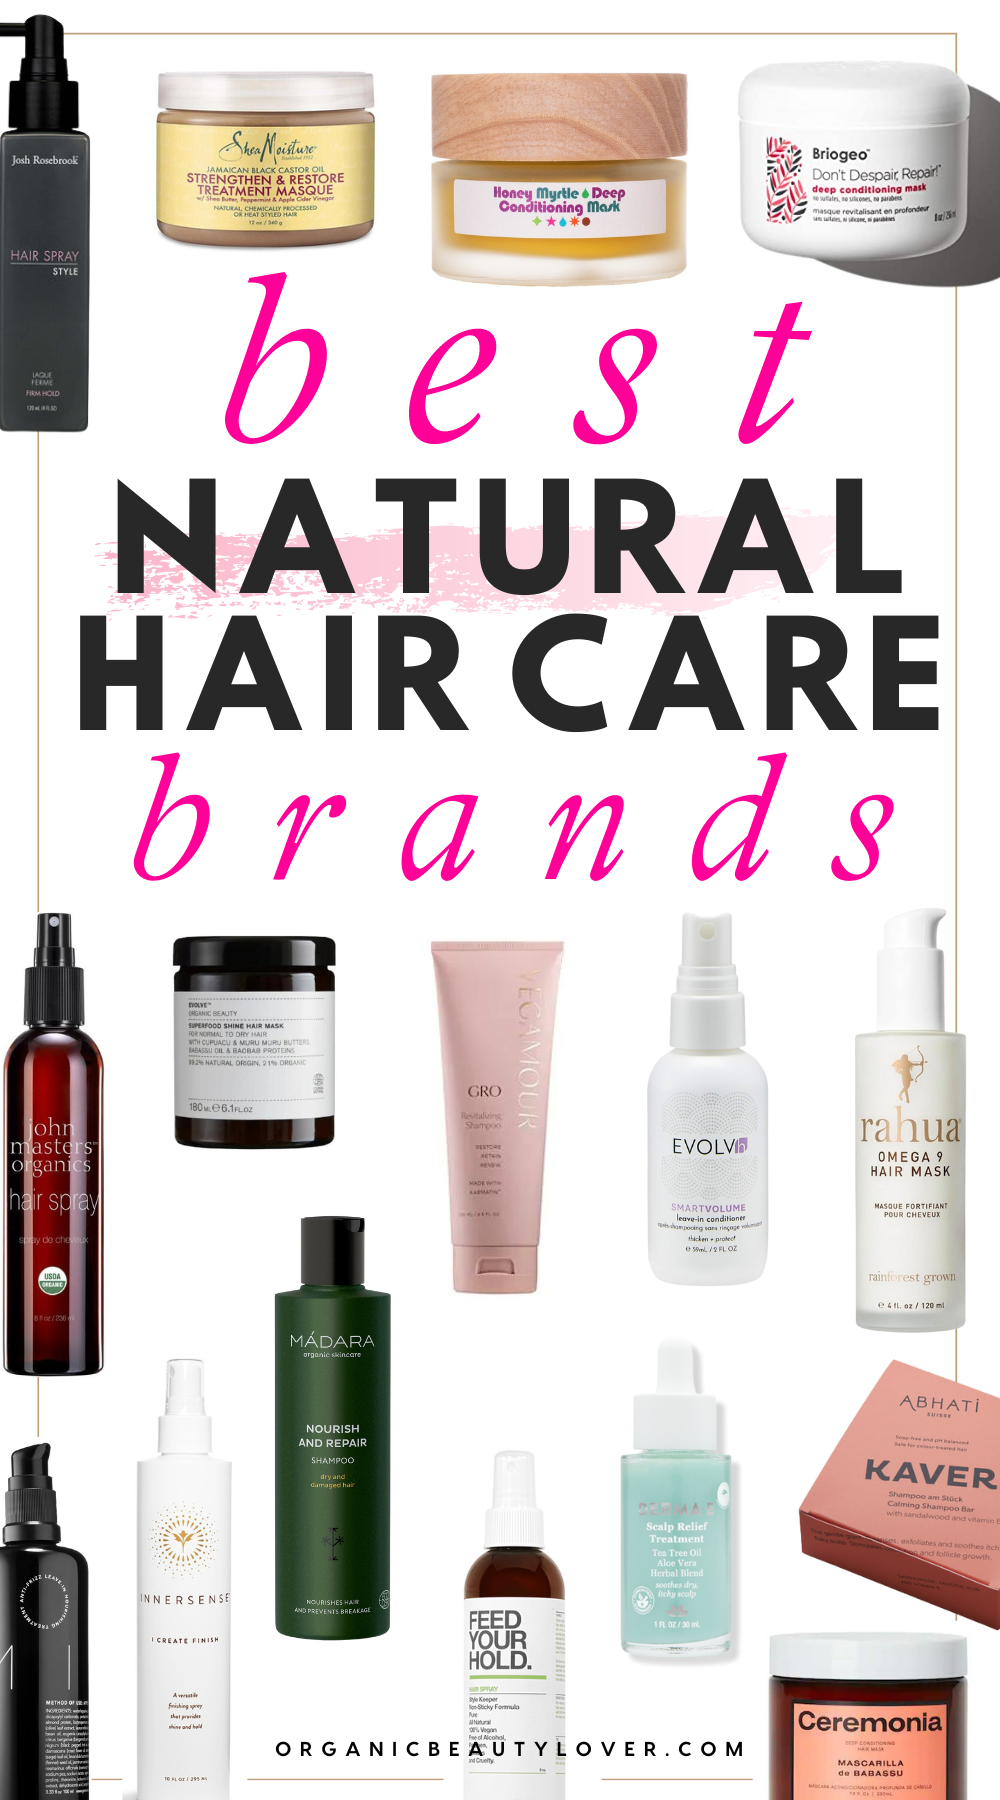 Best cheap hair products: Shampoo, conditioner, curl cream and more | The  Independent